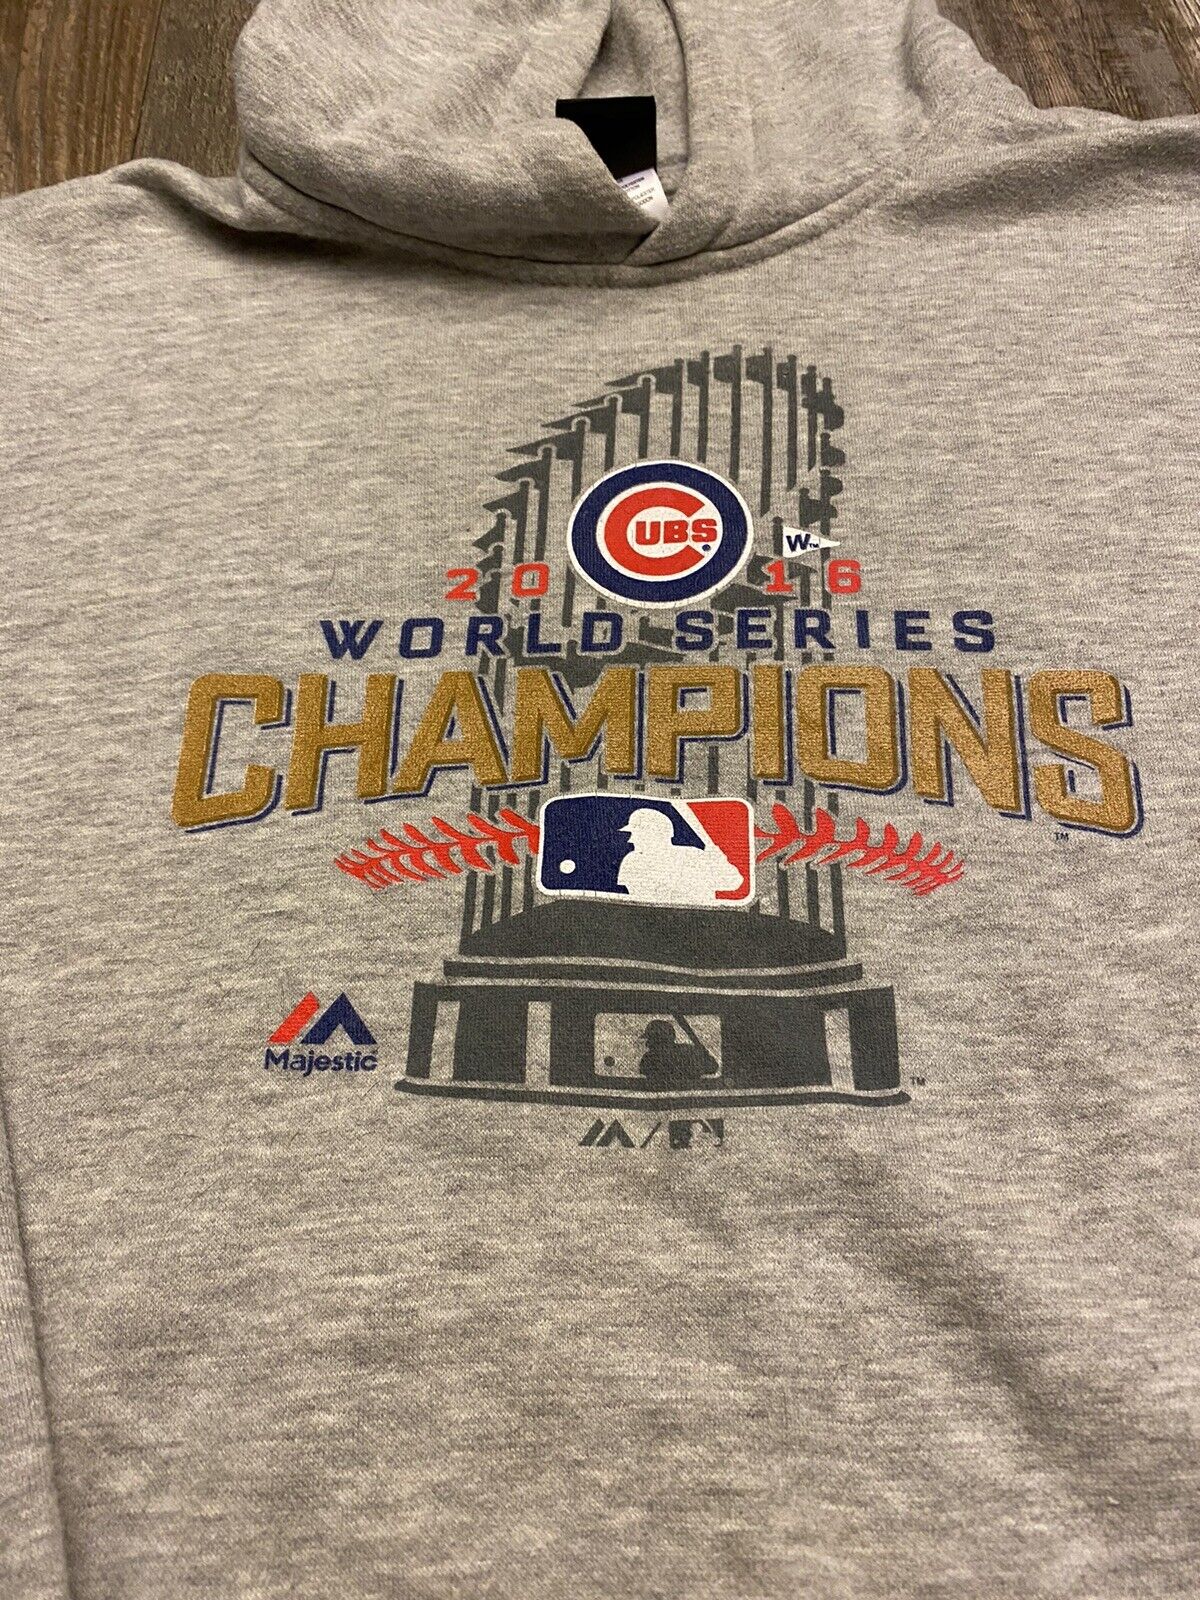 Chicago Cubs 2016 World Series championship hoodie Youth XL (18)